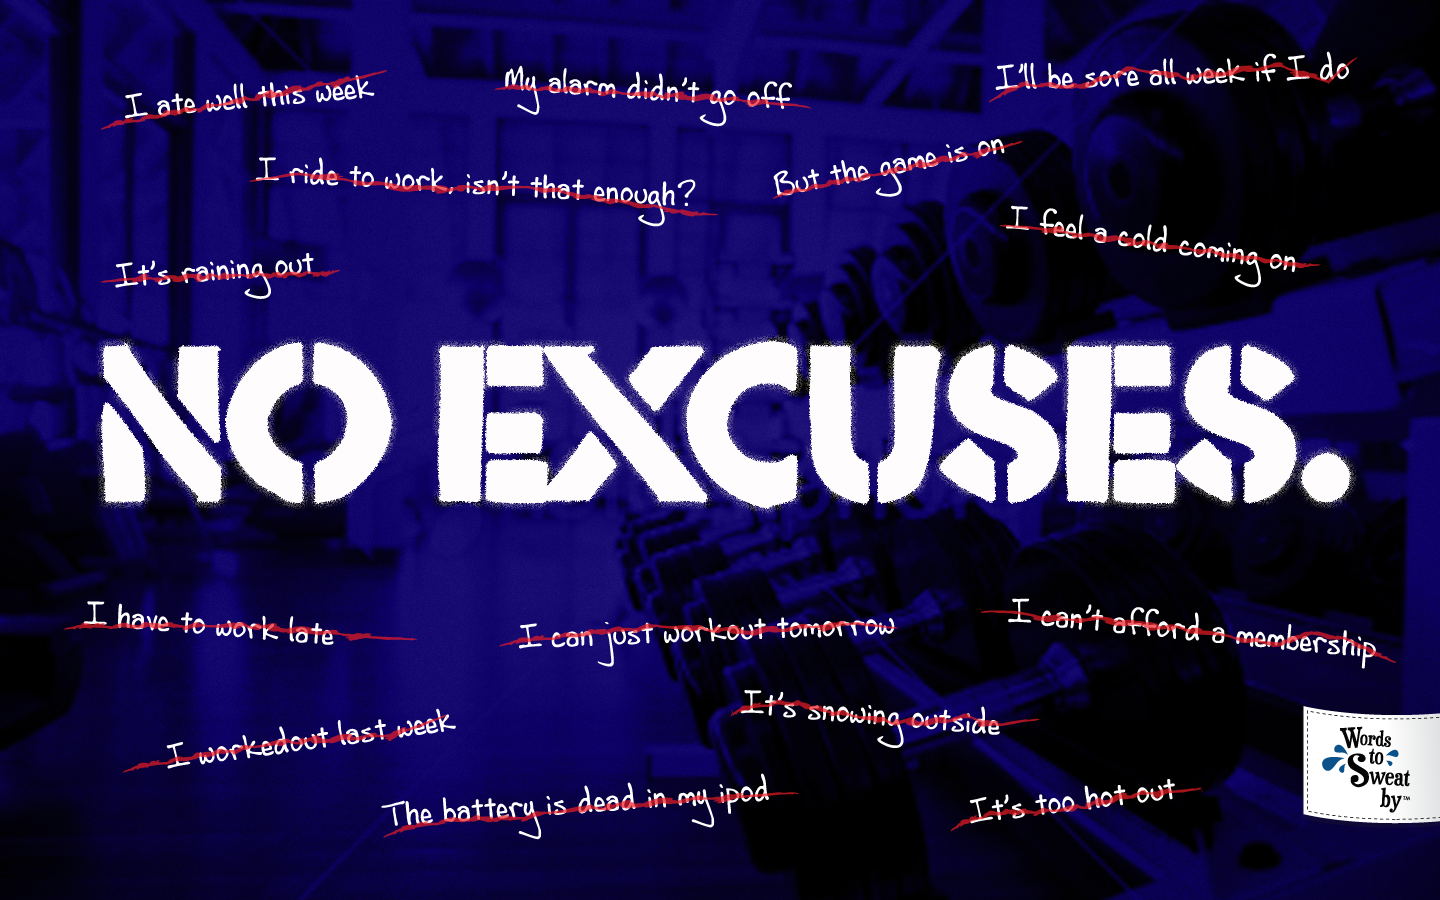 Free download Words to Sweat by No excuses desktop background